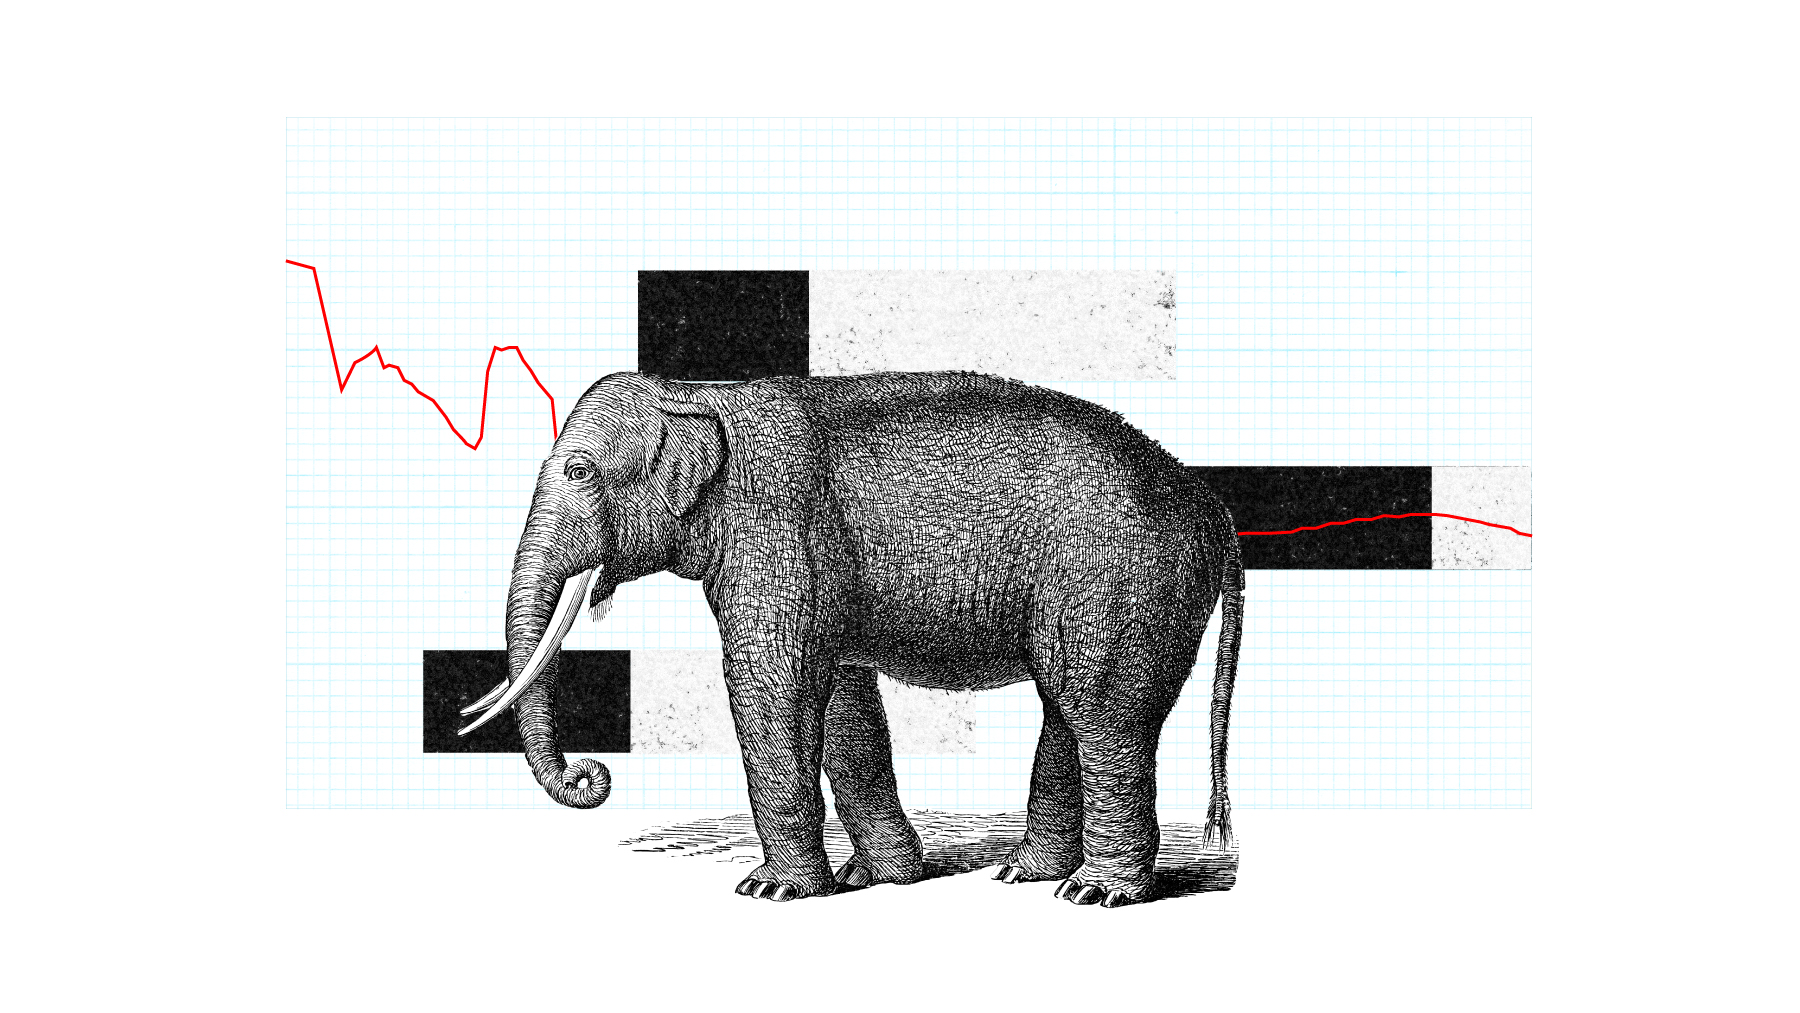 An illustration of an elephant standing in front of stylized line charts.